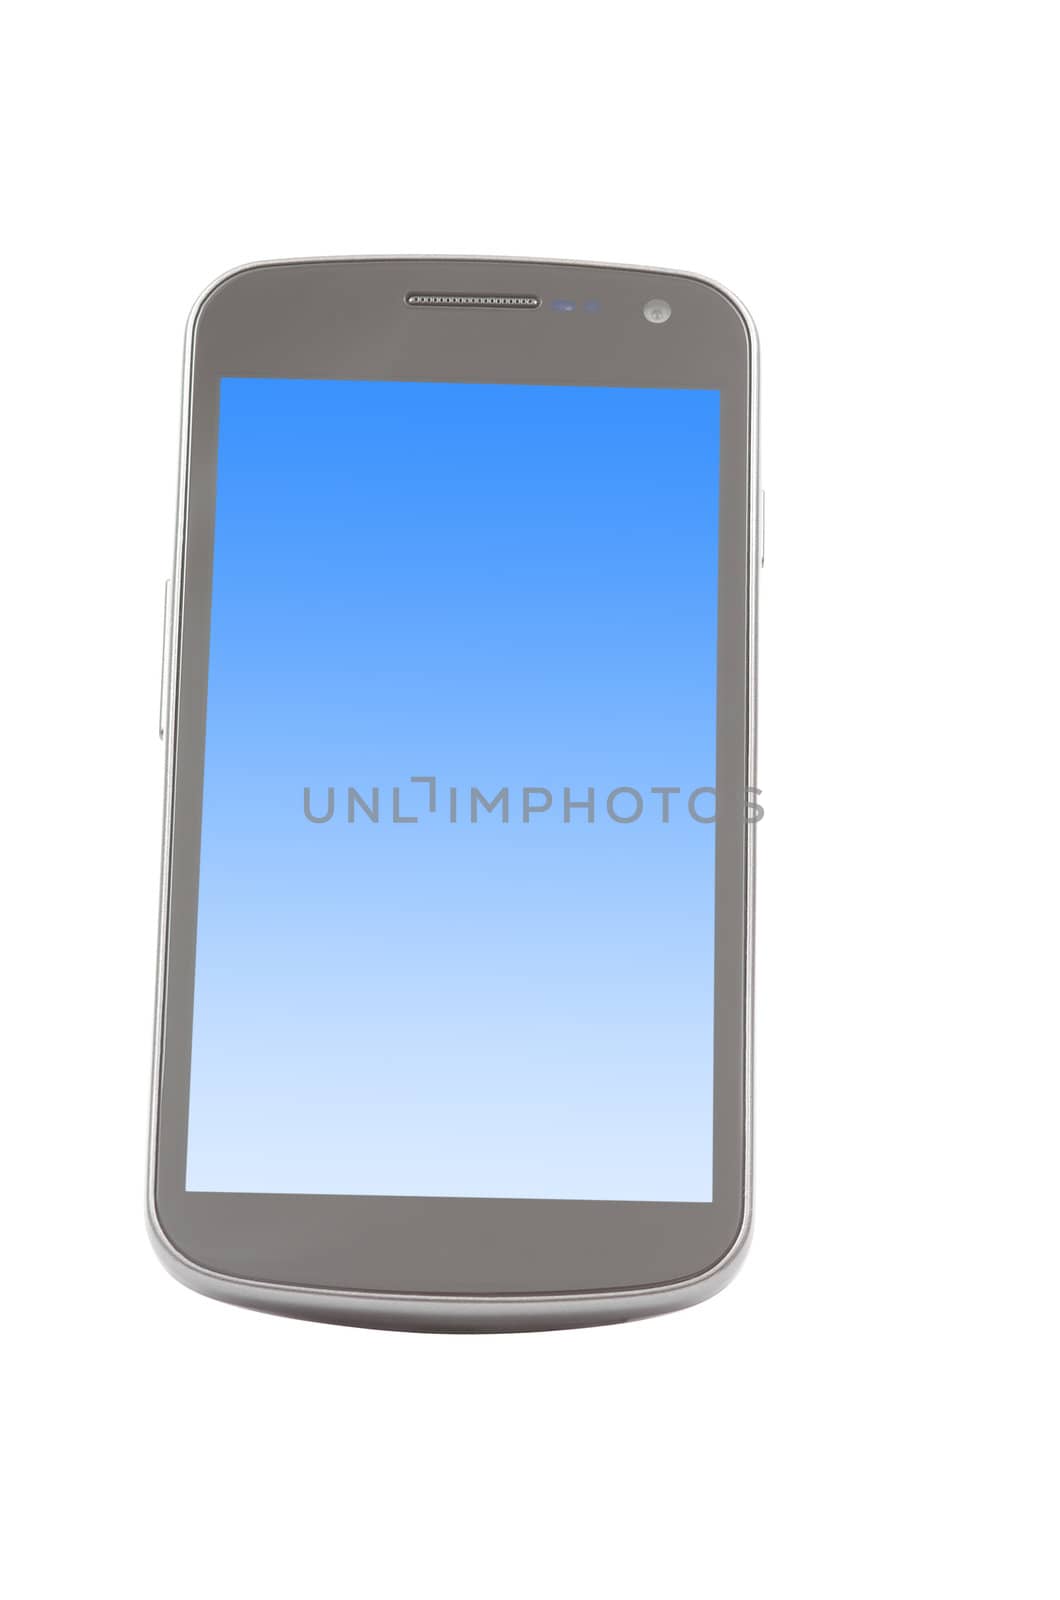 Smartphone with blue screen by savcoco